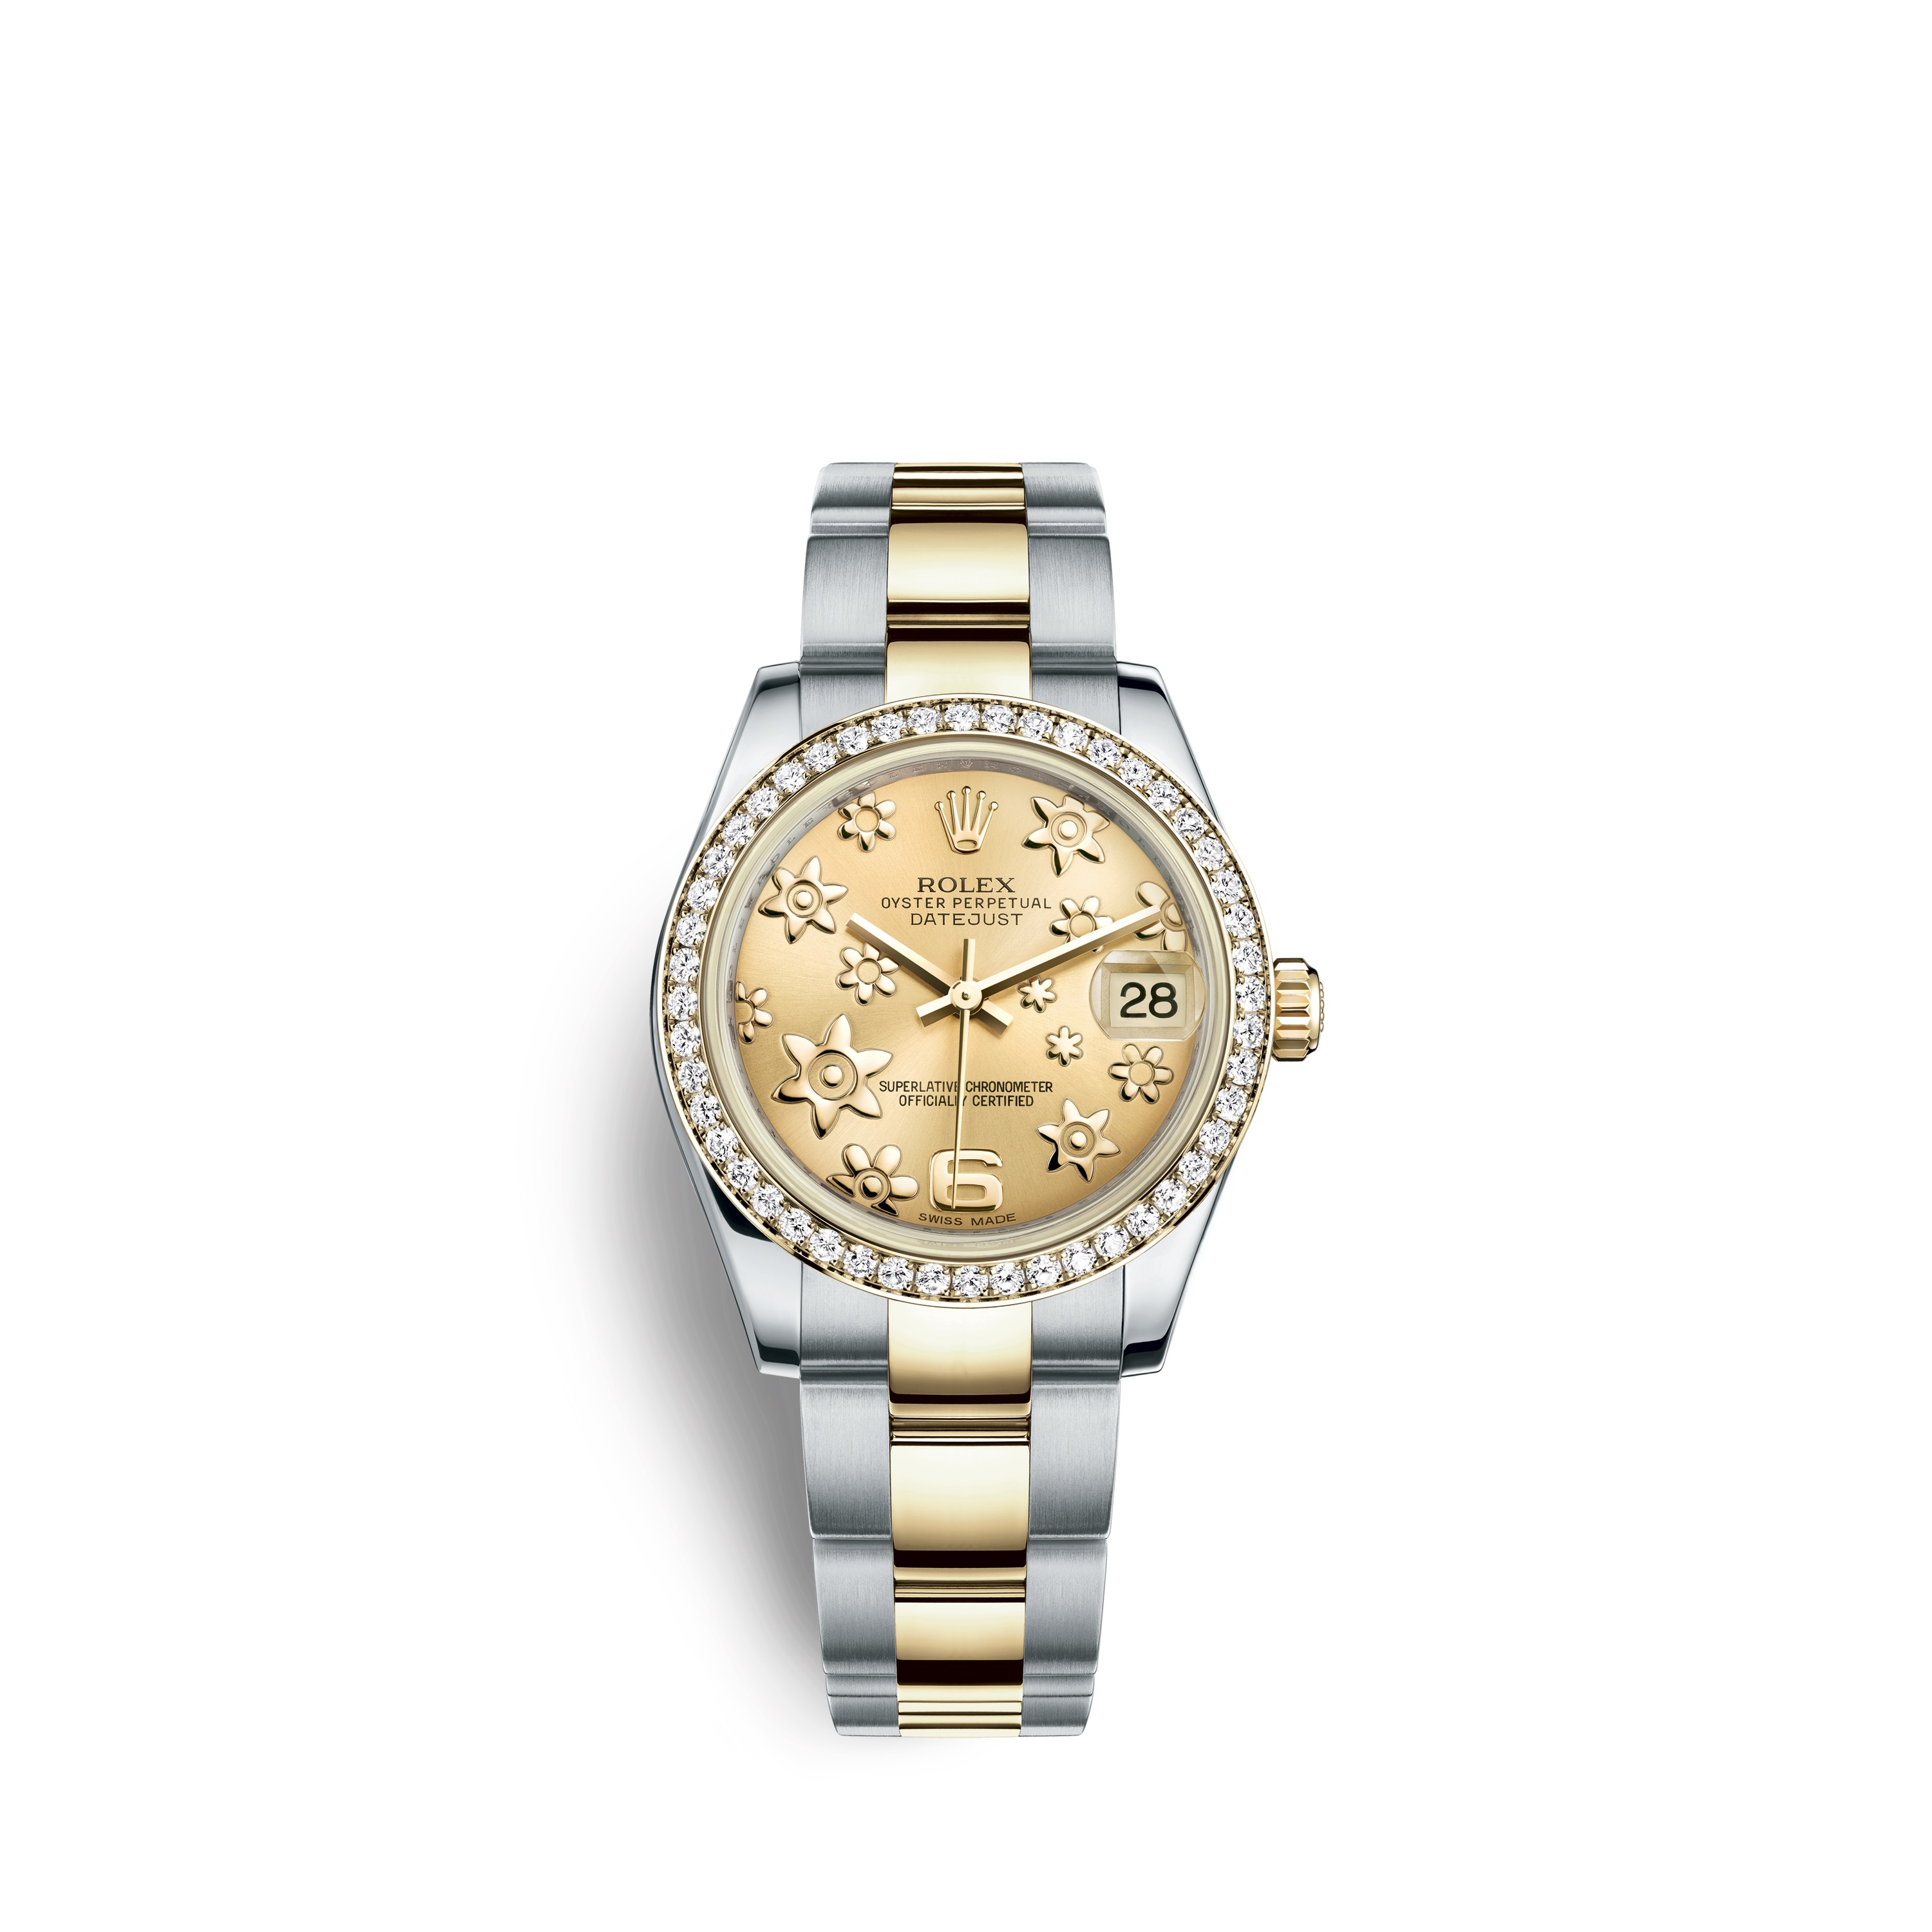 Datejust 31 178383 Gold and Stainless Steel Watch (Champagne Raised Floral Motif)